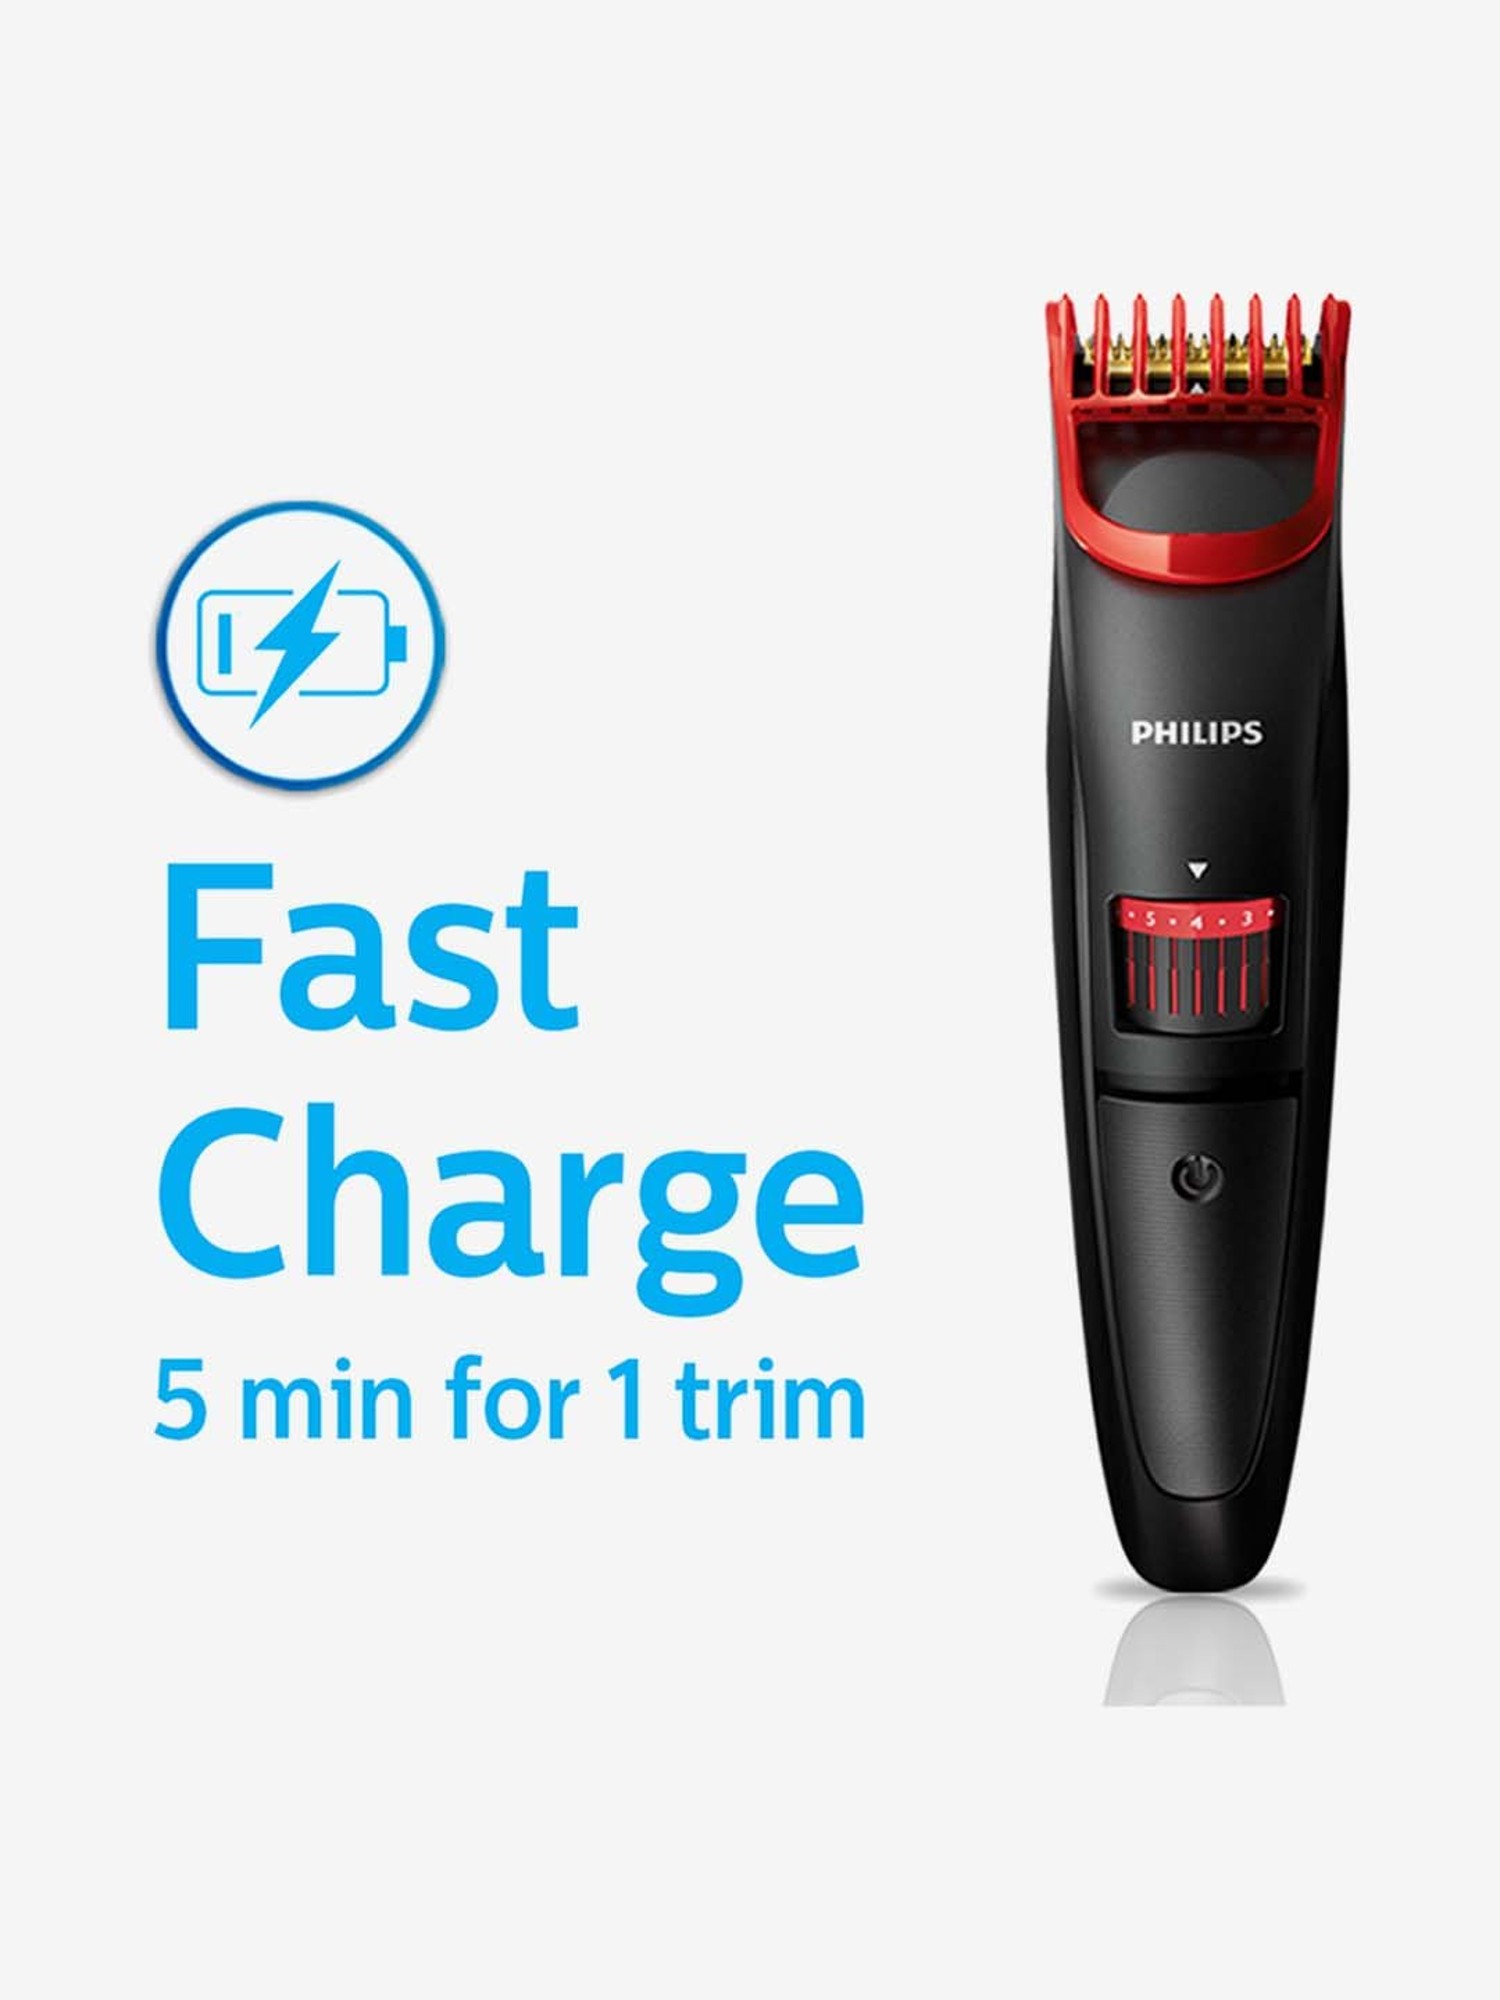 philips trimmer red and black